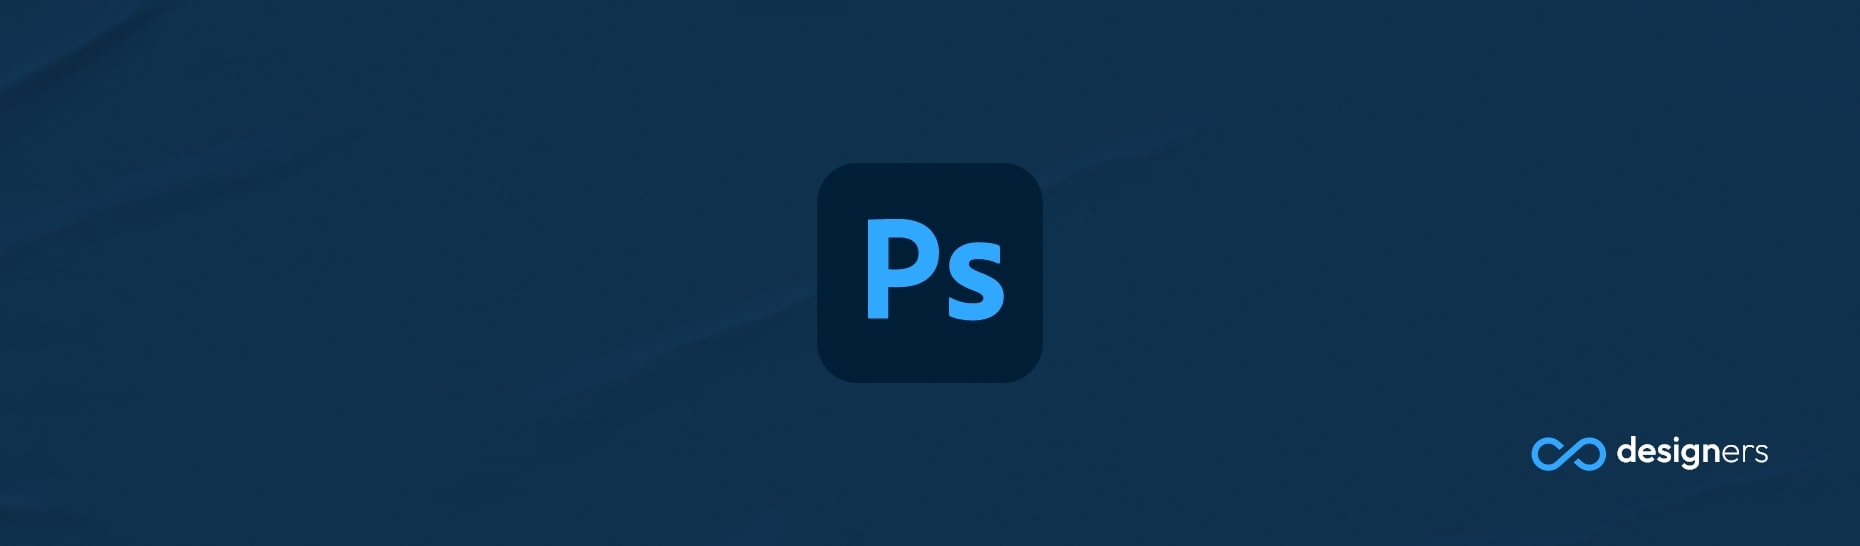 Is there a mirror tool in Photoshop?